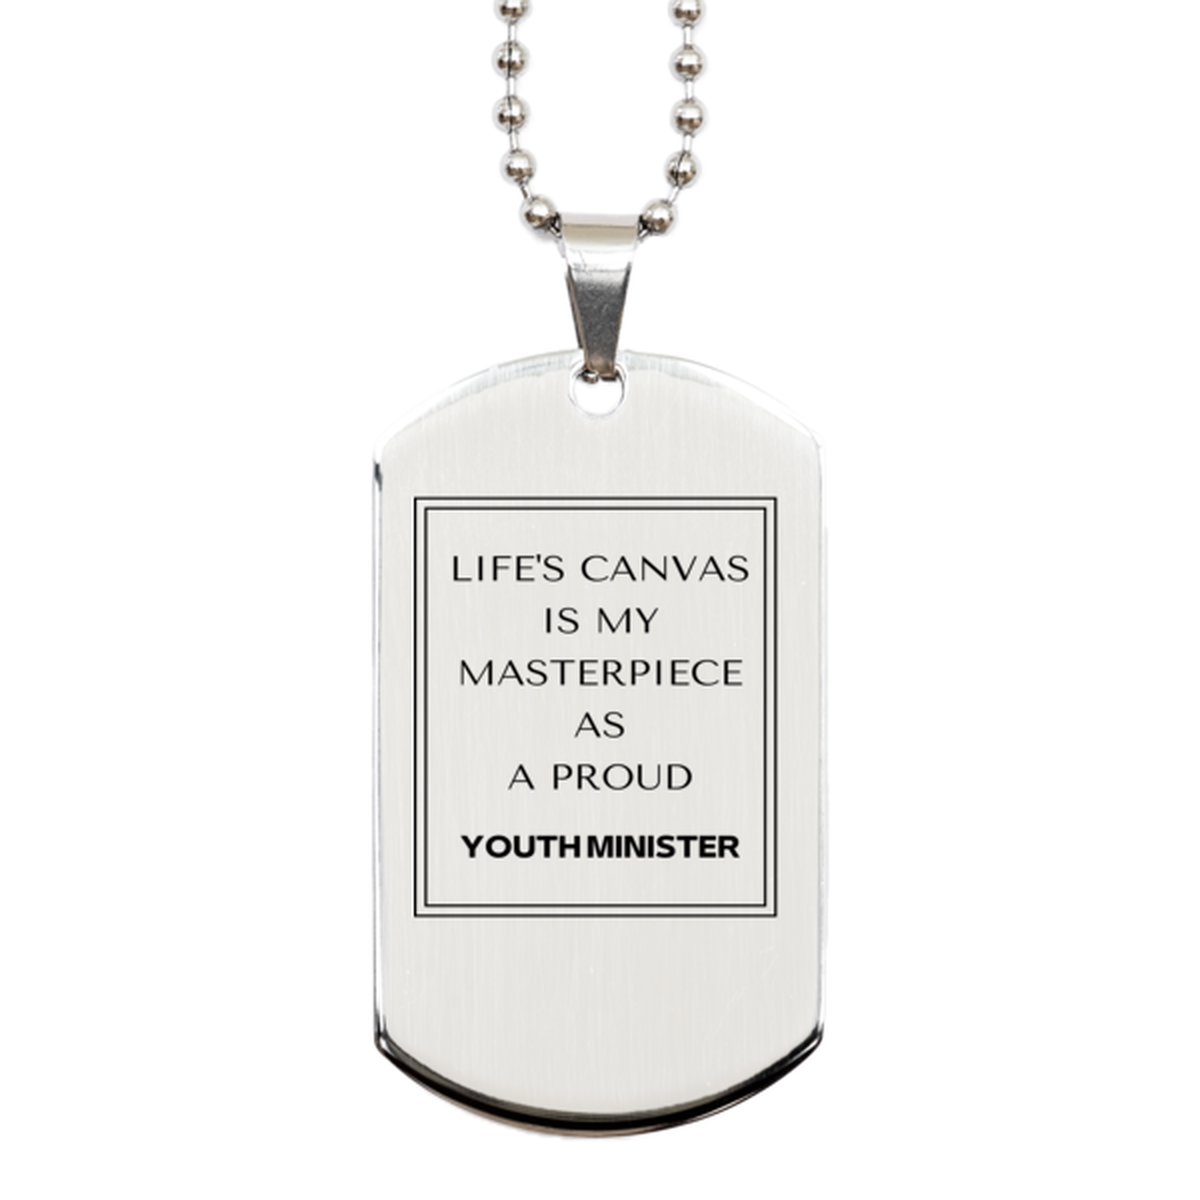 Proud Youth Minister Gifts, Life's canvas is my masterpiece, Epic Birthday Christmas Unique Silver Dog Tag For Youth Minister, Coworkers, Men, Women, Friends